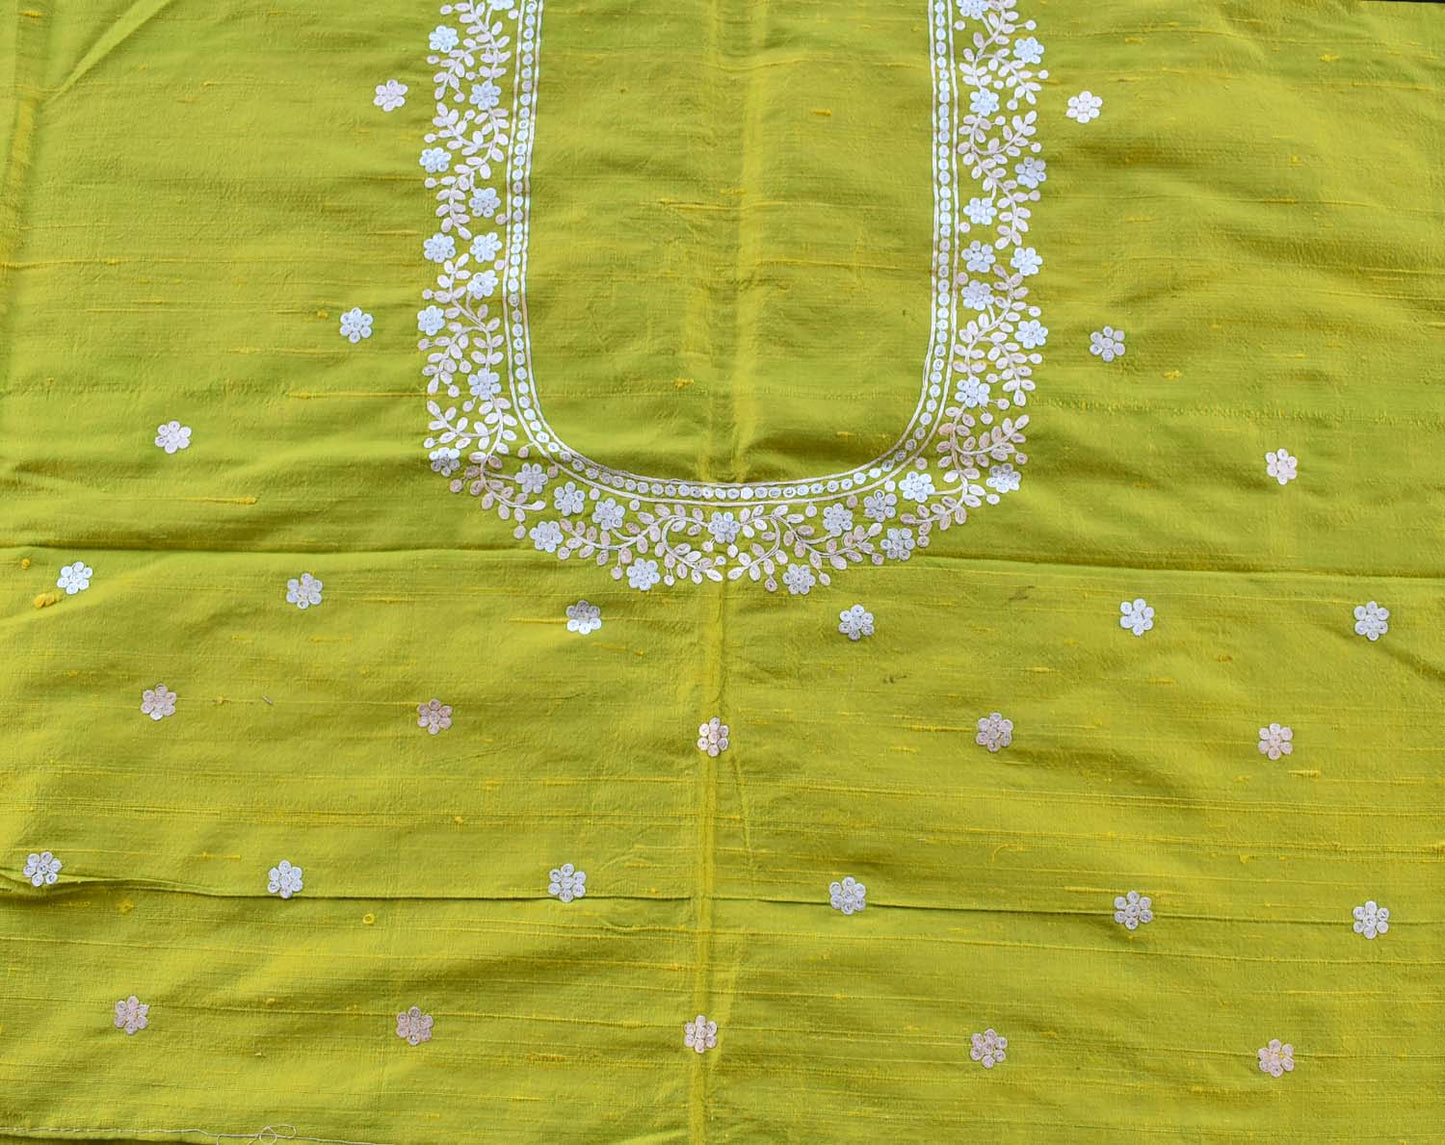 Raw Silk Fabric with Pitta work Embroidery